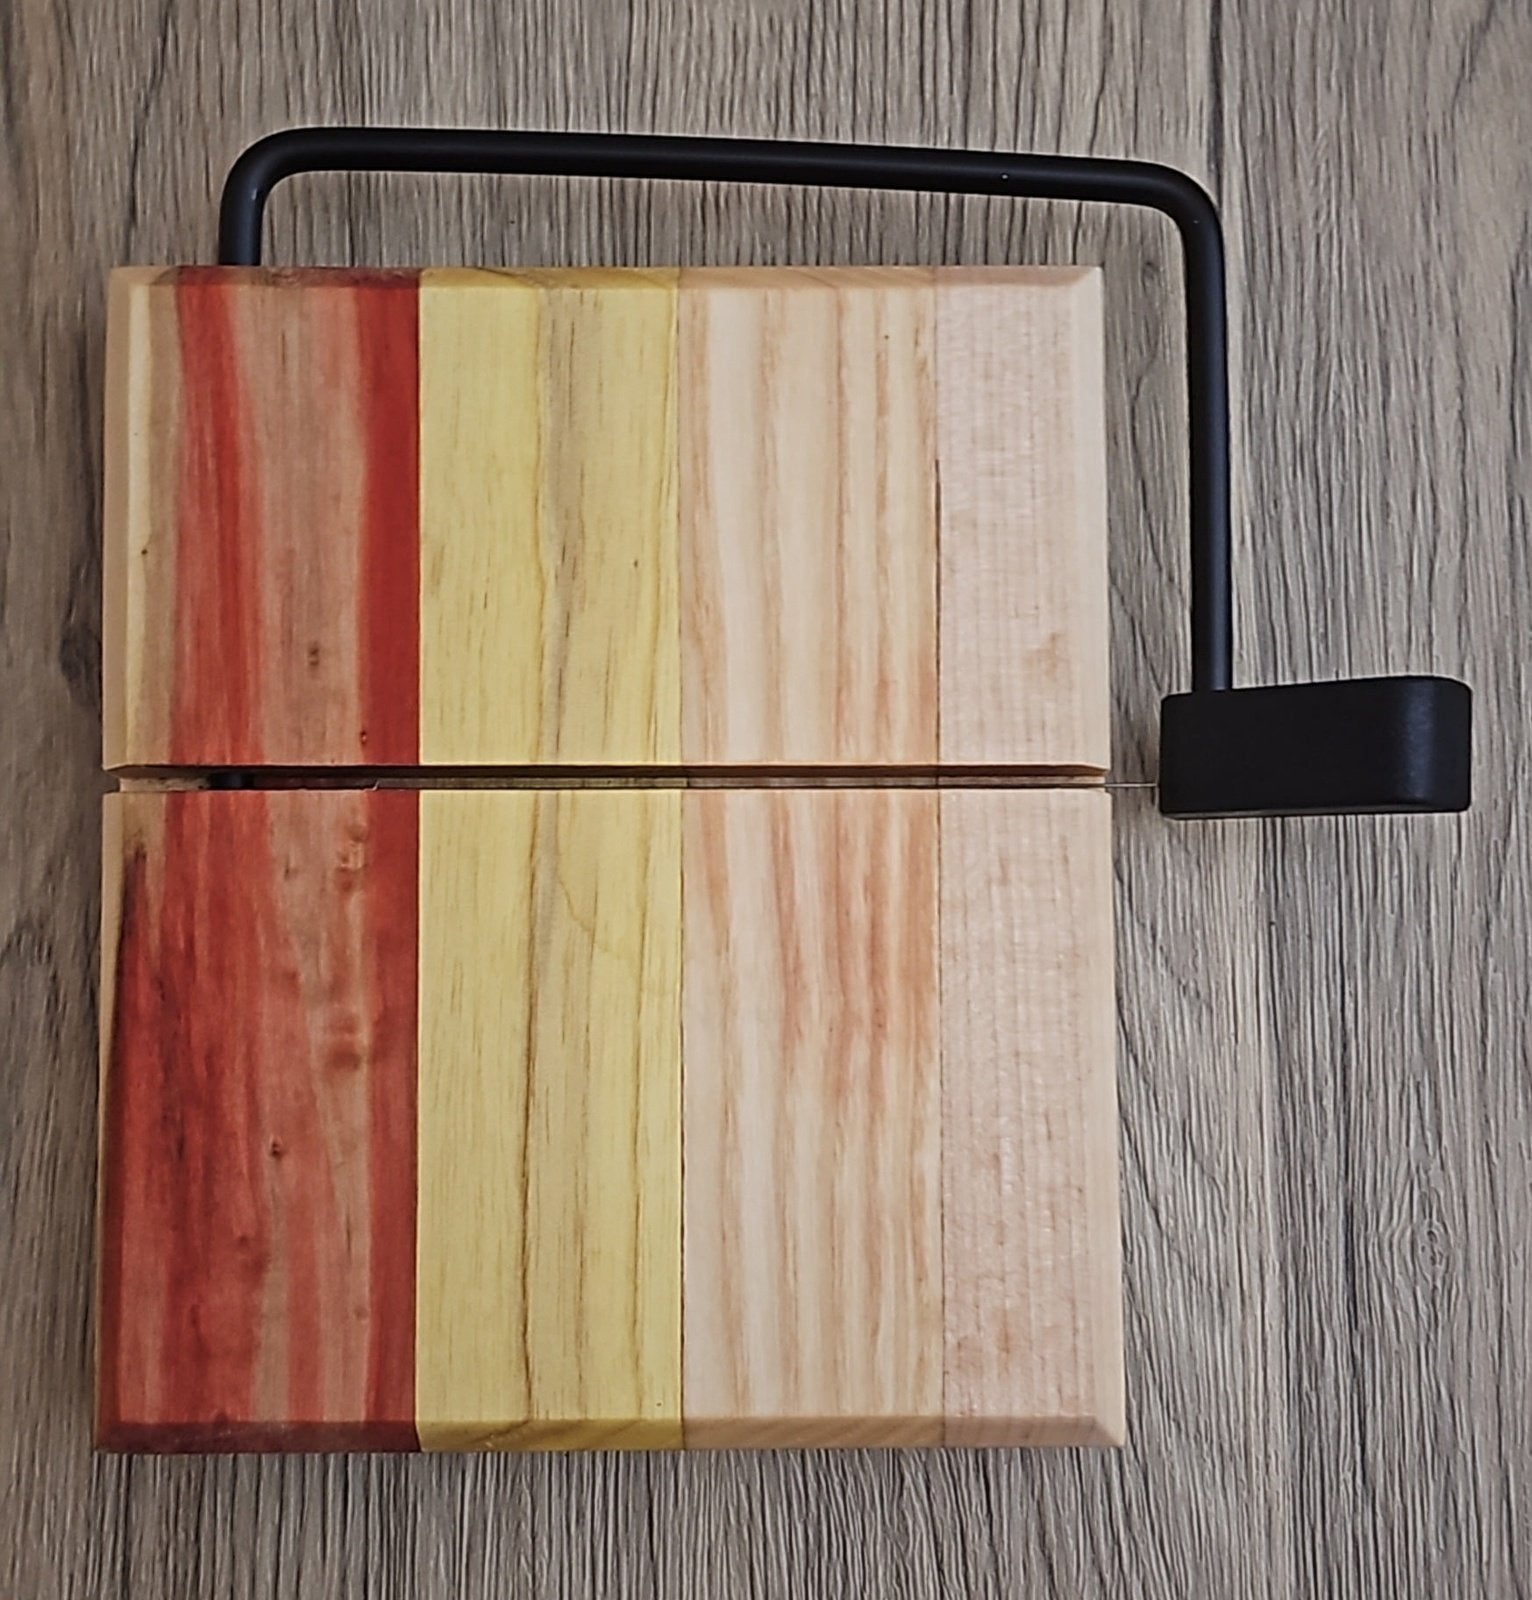 Box Elder, Mulberry, Hickory, and Ash Cheese Slicer Board